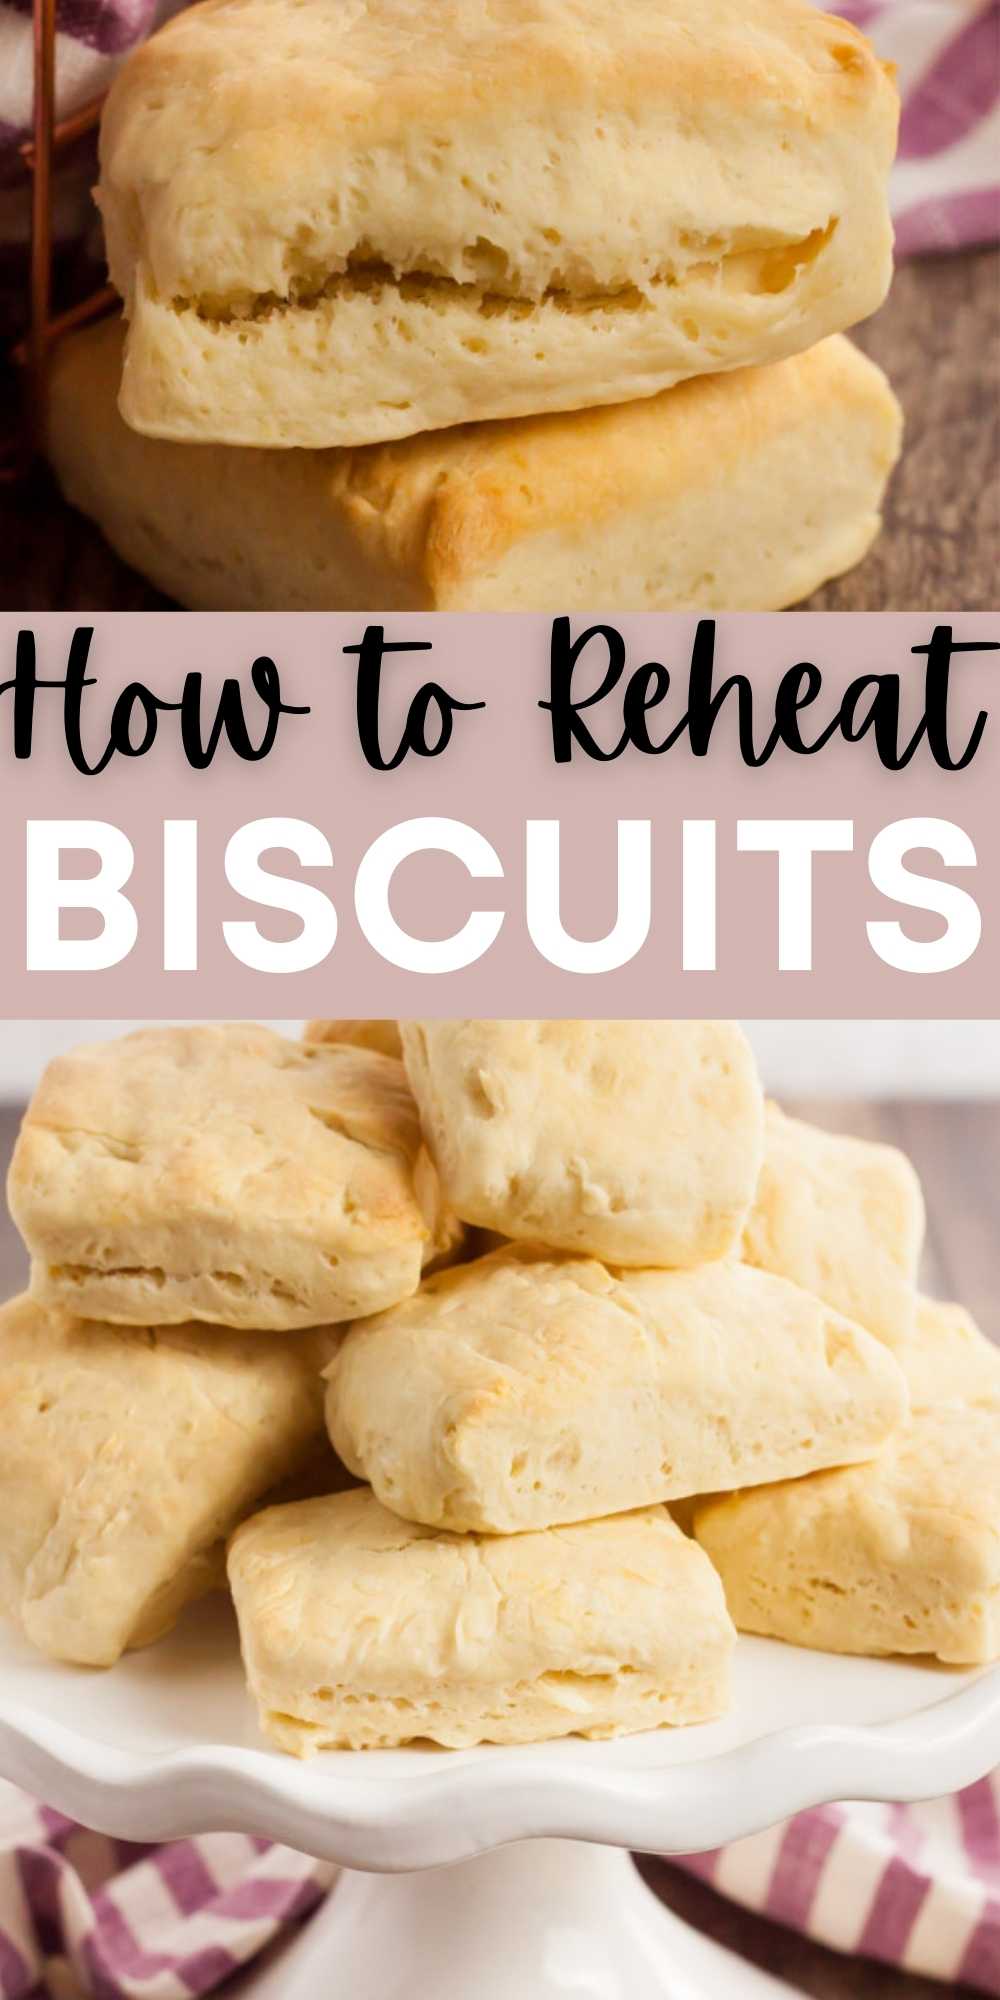 How to Reheat Biscuits the right way is essential to always have the fresh oven taste biscuits whenever you have leftovers. Learn how to reheat biscuits in the microwave, in the oven, in the air fryer or in a toaster oven.  Plus learn how to reheat biscuits from frozen.  #eatingonadime #biscuits #reheating #kitchentips 
